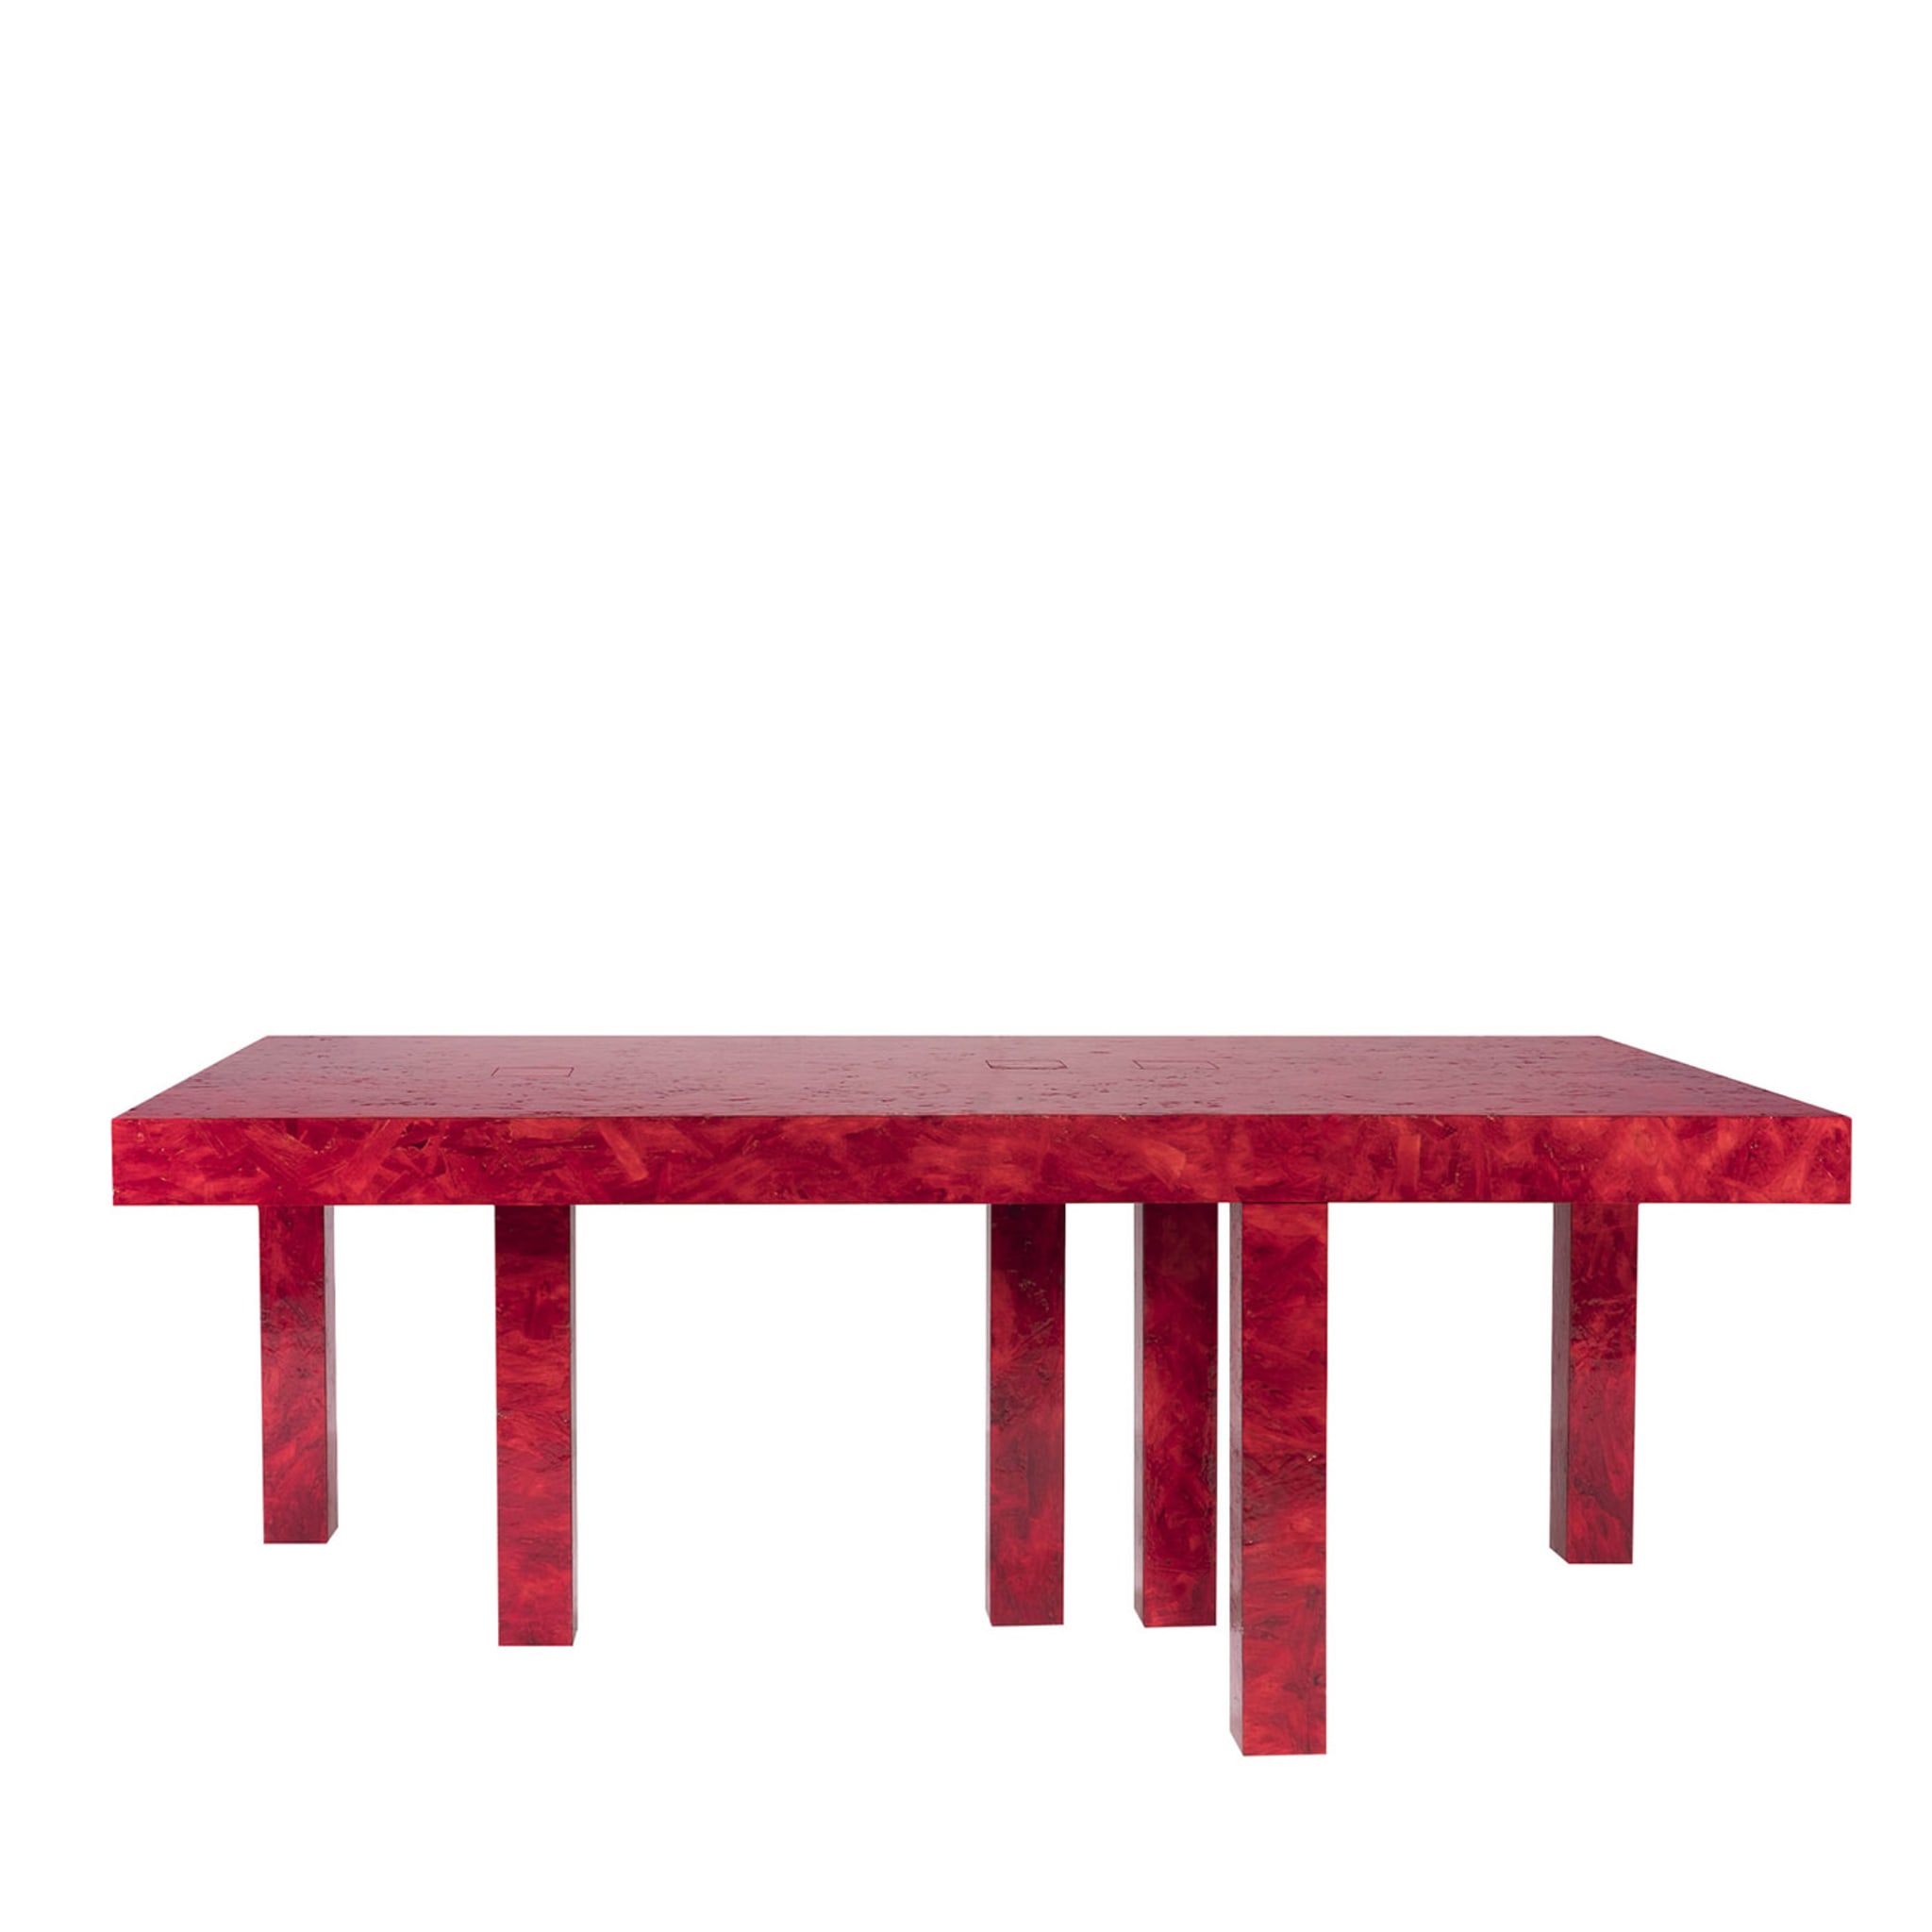 Six-Legged Touch Table Red by Fabrizio Contaldo  - Main view